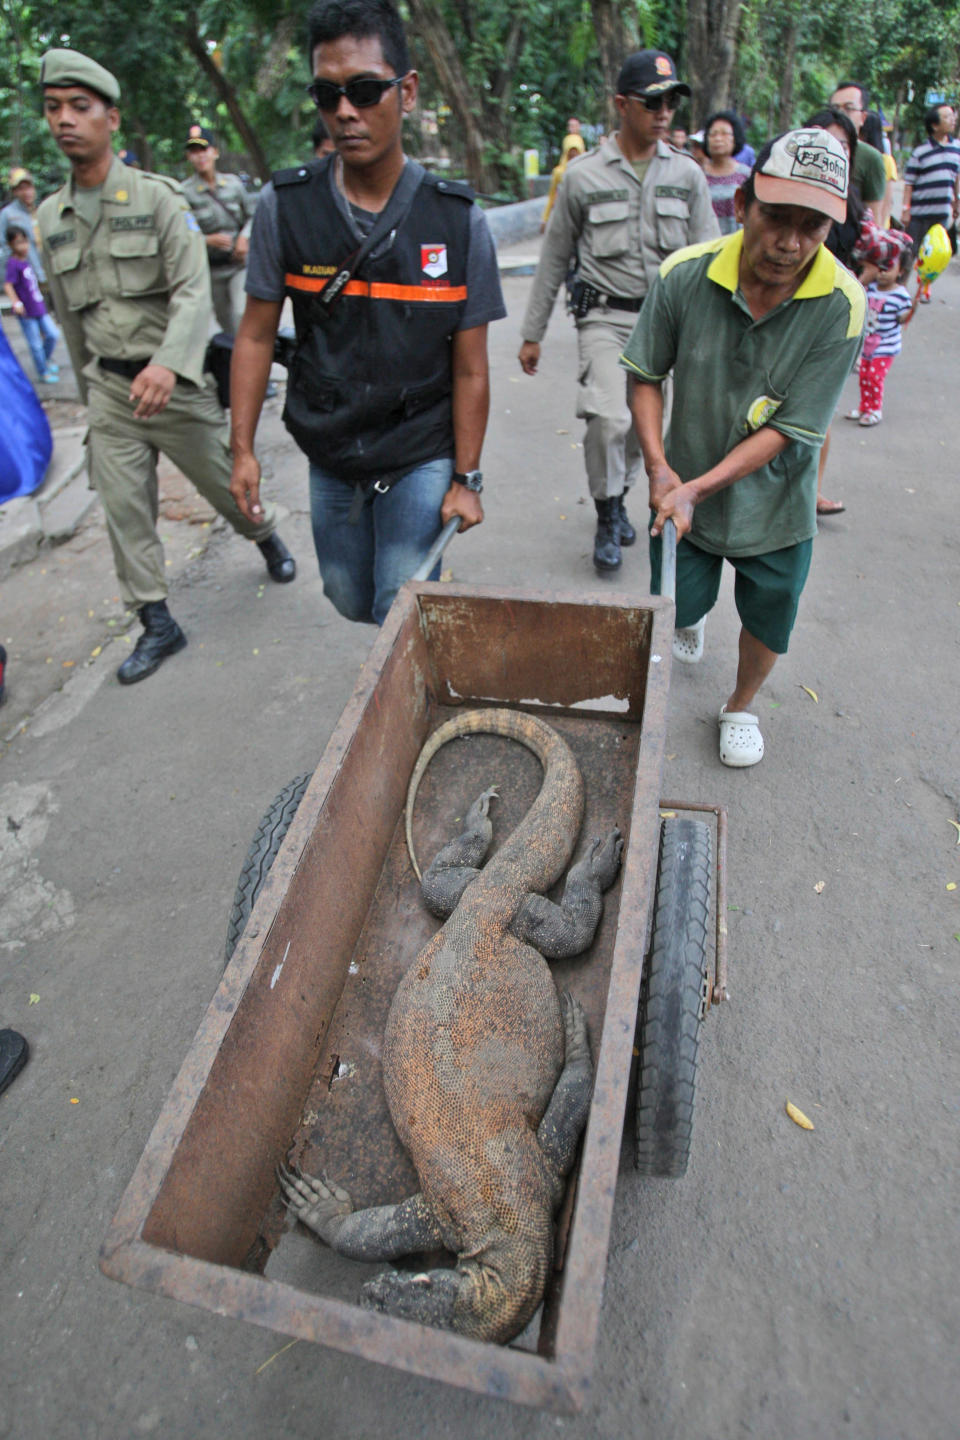 A police officer and a zoo employee take a Komodo dragon that was found dead in its cage for an autopsy, at Surabaya Zoo in Surabaya, East Java, Indonesia, Saturday, Feb. 1, 2014. Indonesia's largest and problem-plagued zoo has been criticized over the deaths of scores of animals, including African lions and a Sumatran tiger, over the last few years. The death of a giraffe two years ago with a beach ball-sized wad of plastic food wrappers in its belly sparked outrage among conservationists. (AP Photo/Trisnadi)